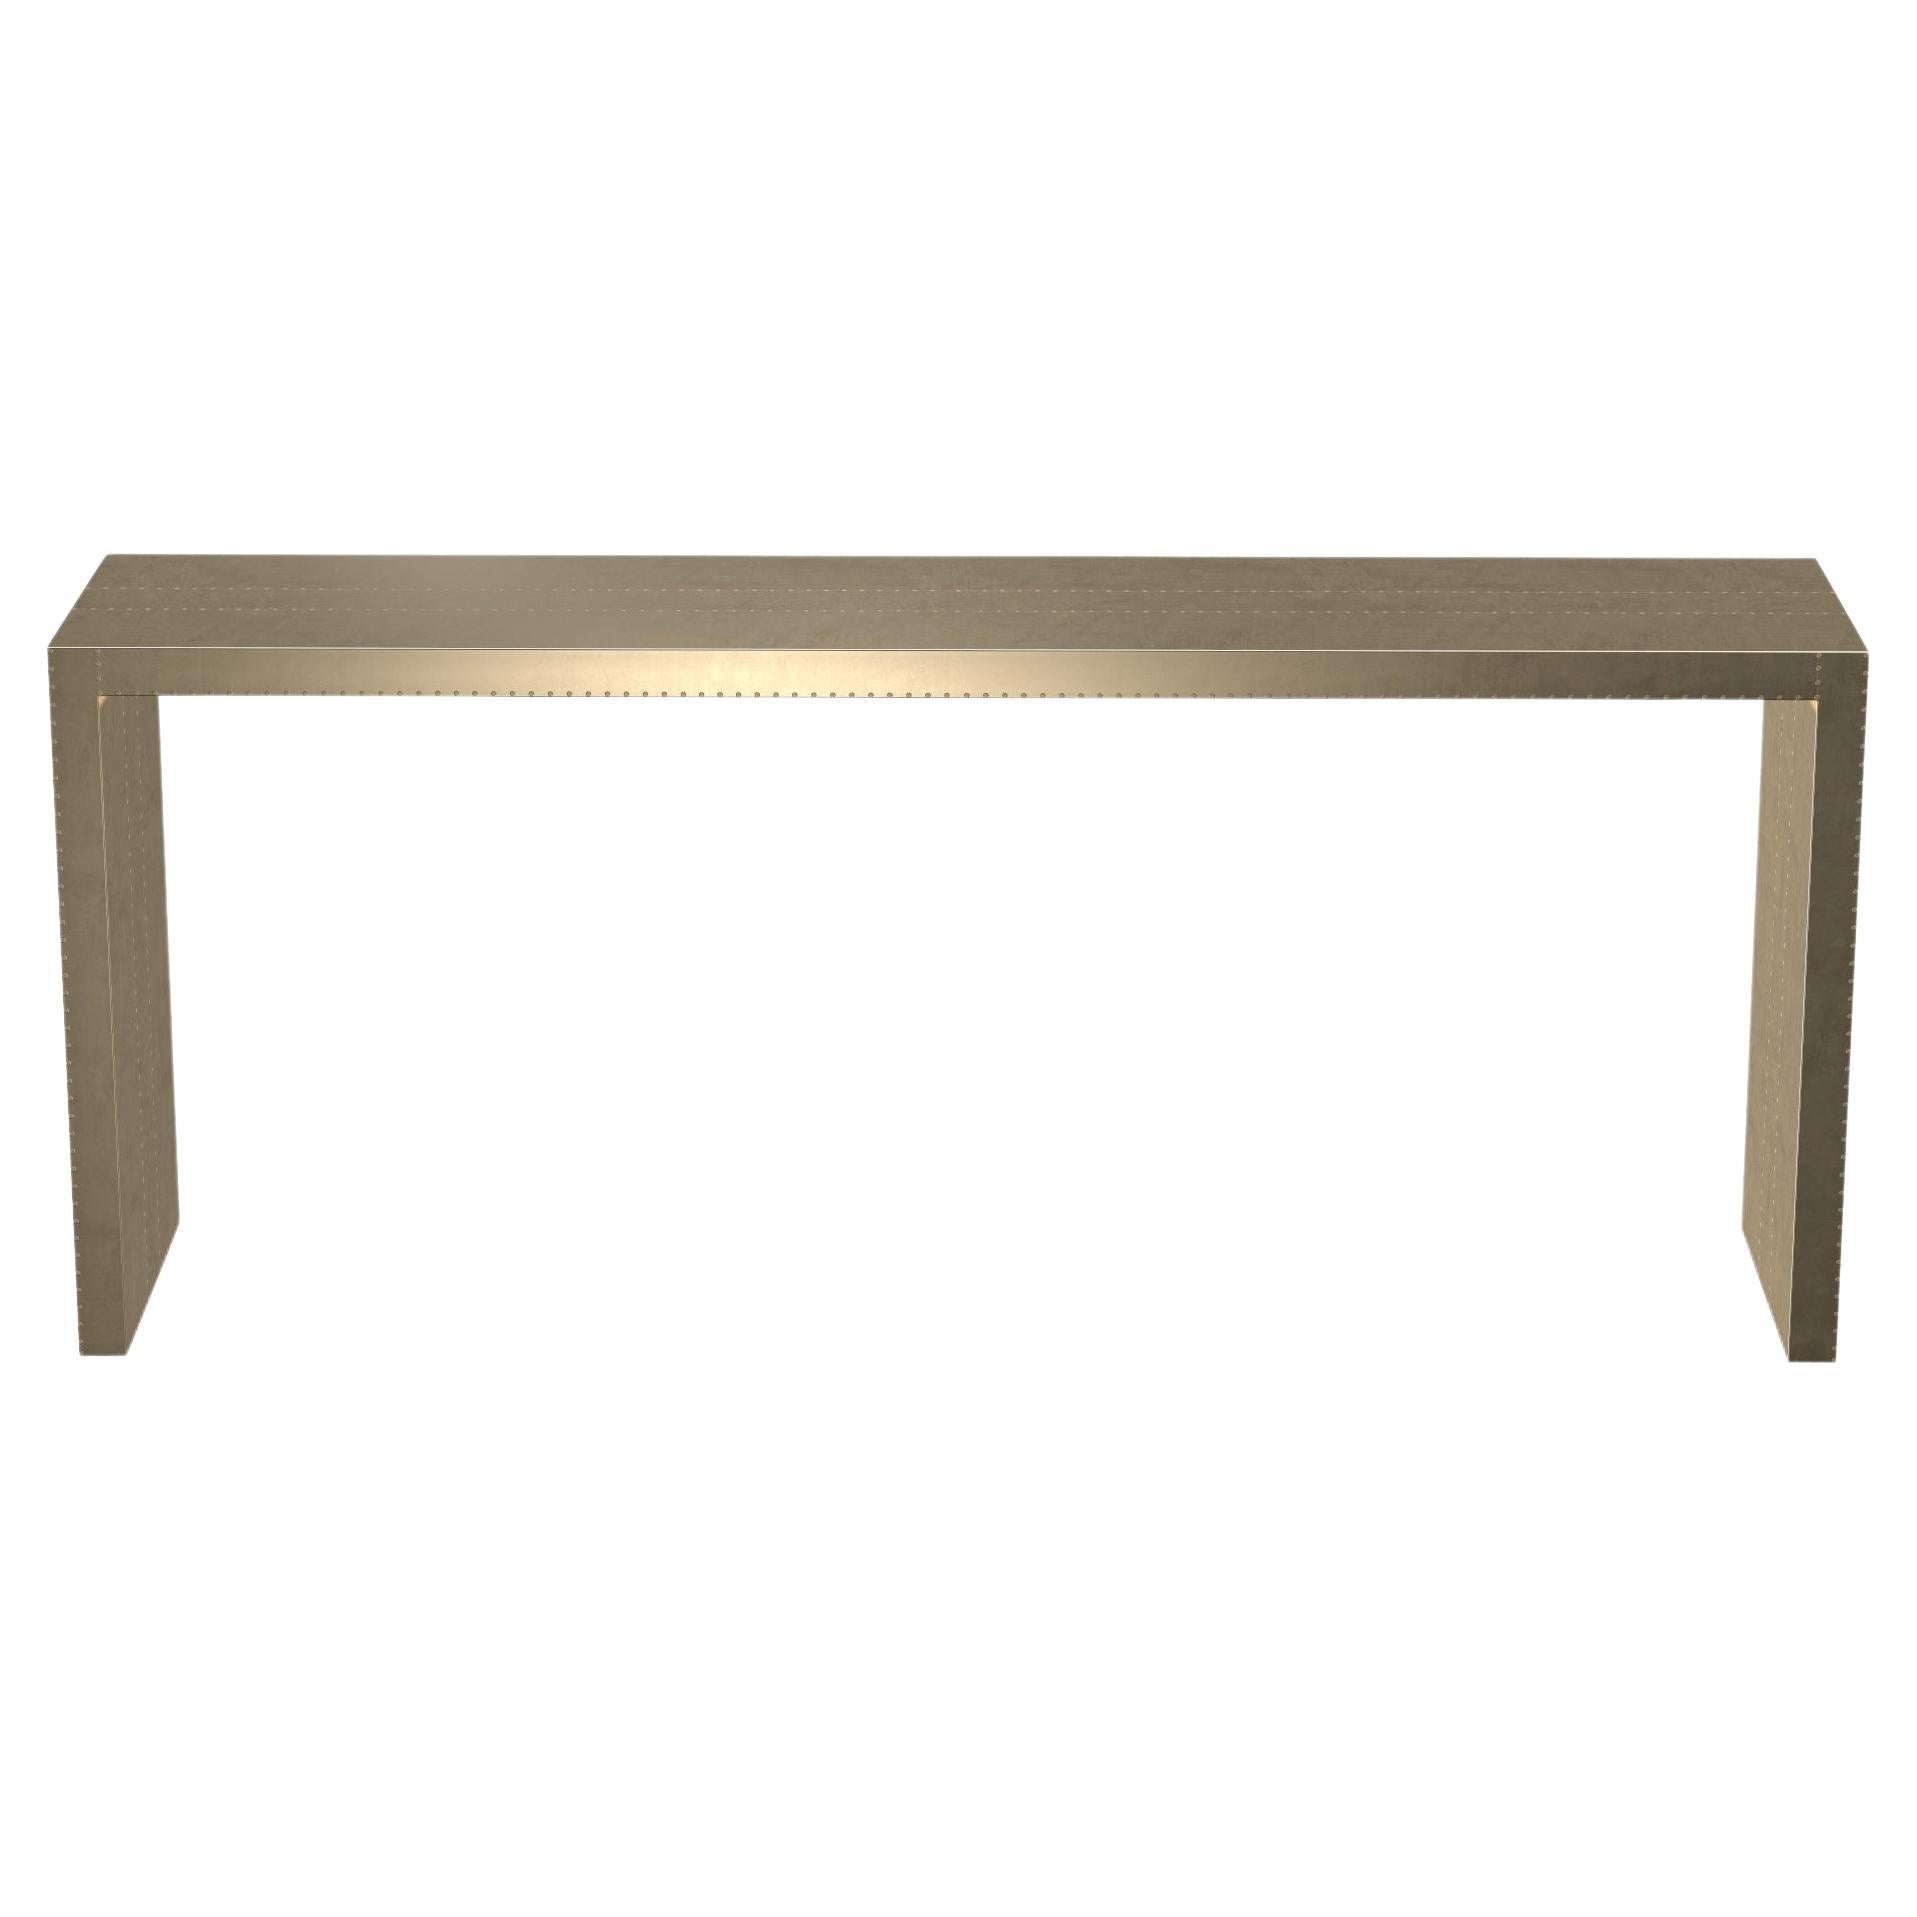 Art Deco Coffee and Cocktail Tables Rectangular Console in Smooth Brass 